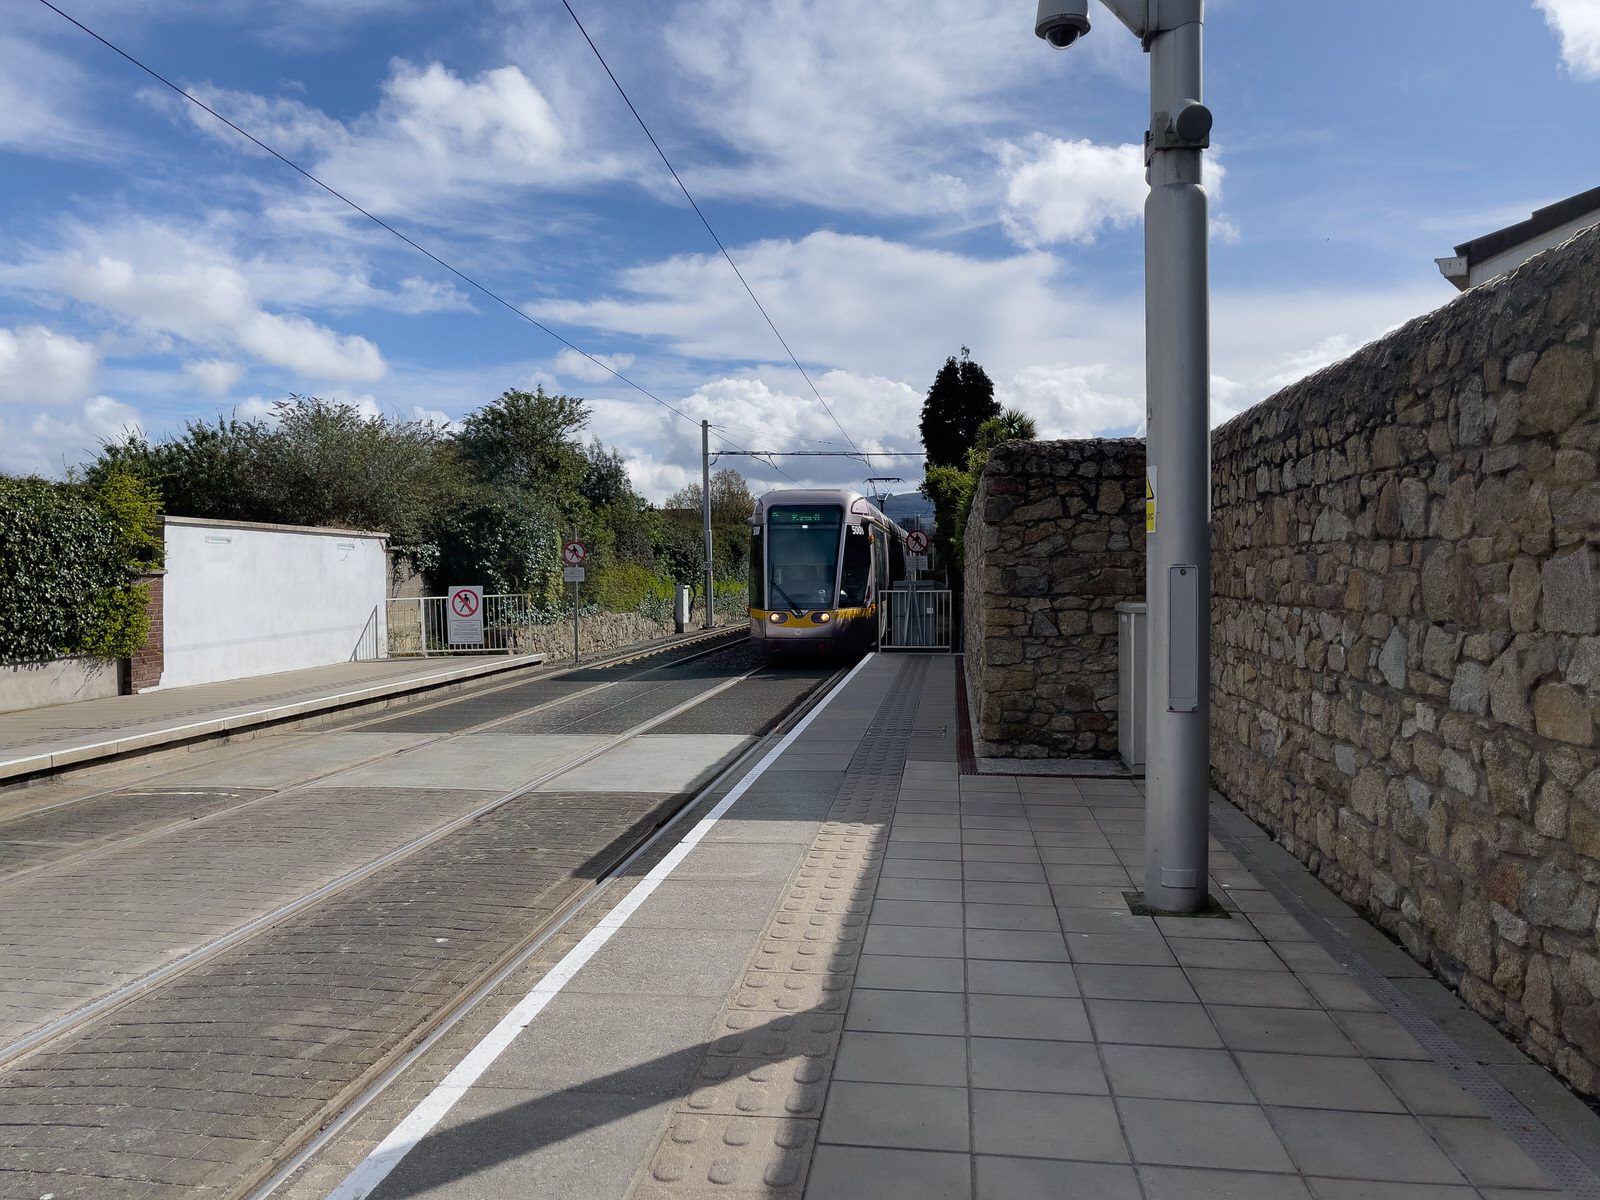 THE LUAS TRAM STOP AT WINDY ARBOUR AND THE IMMEDIATE AREA 044